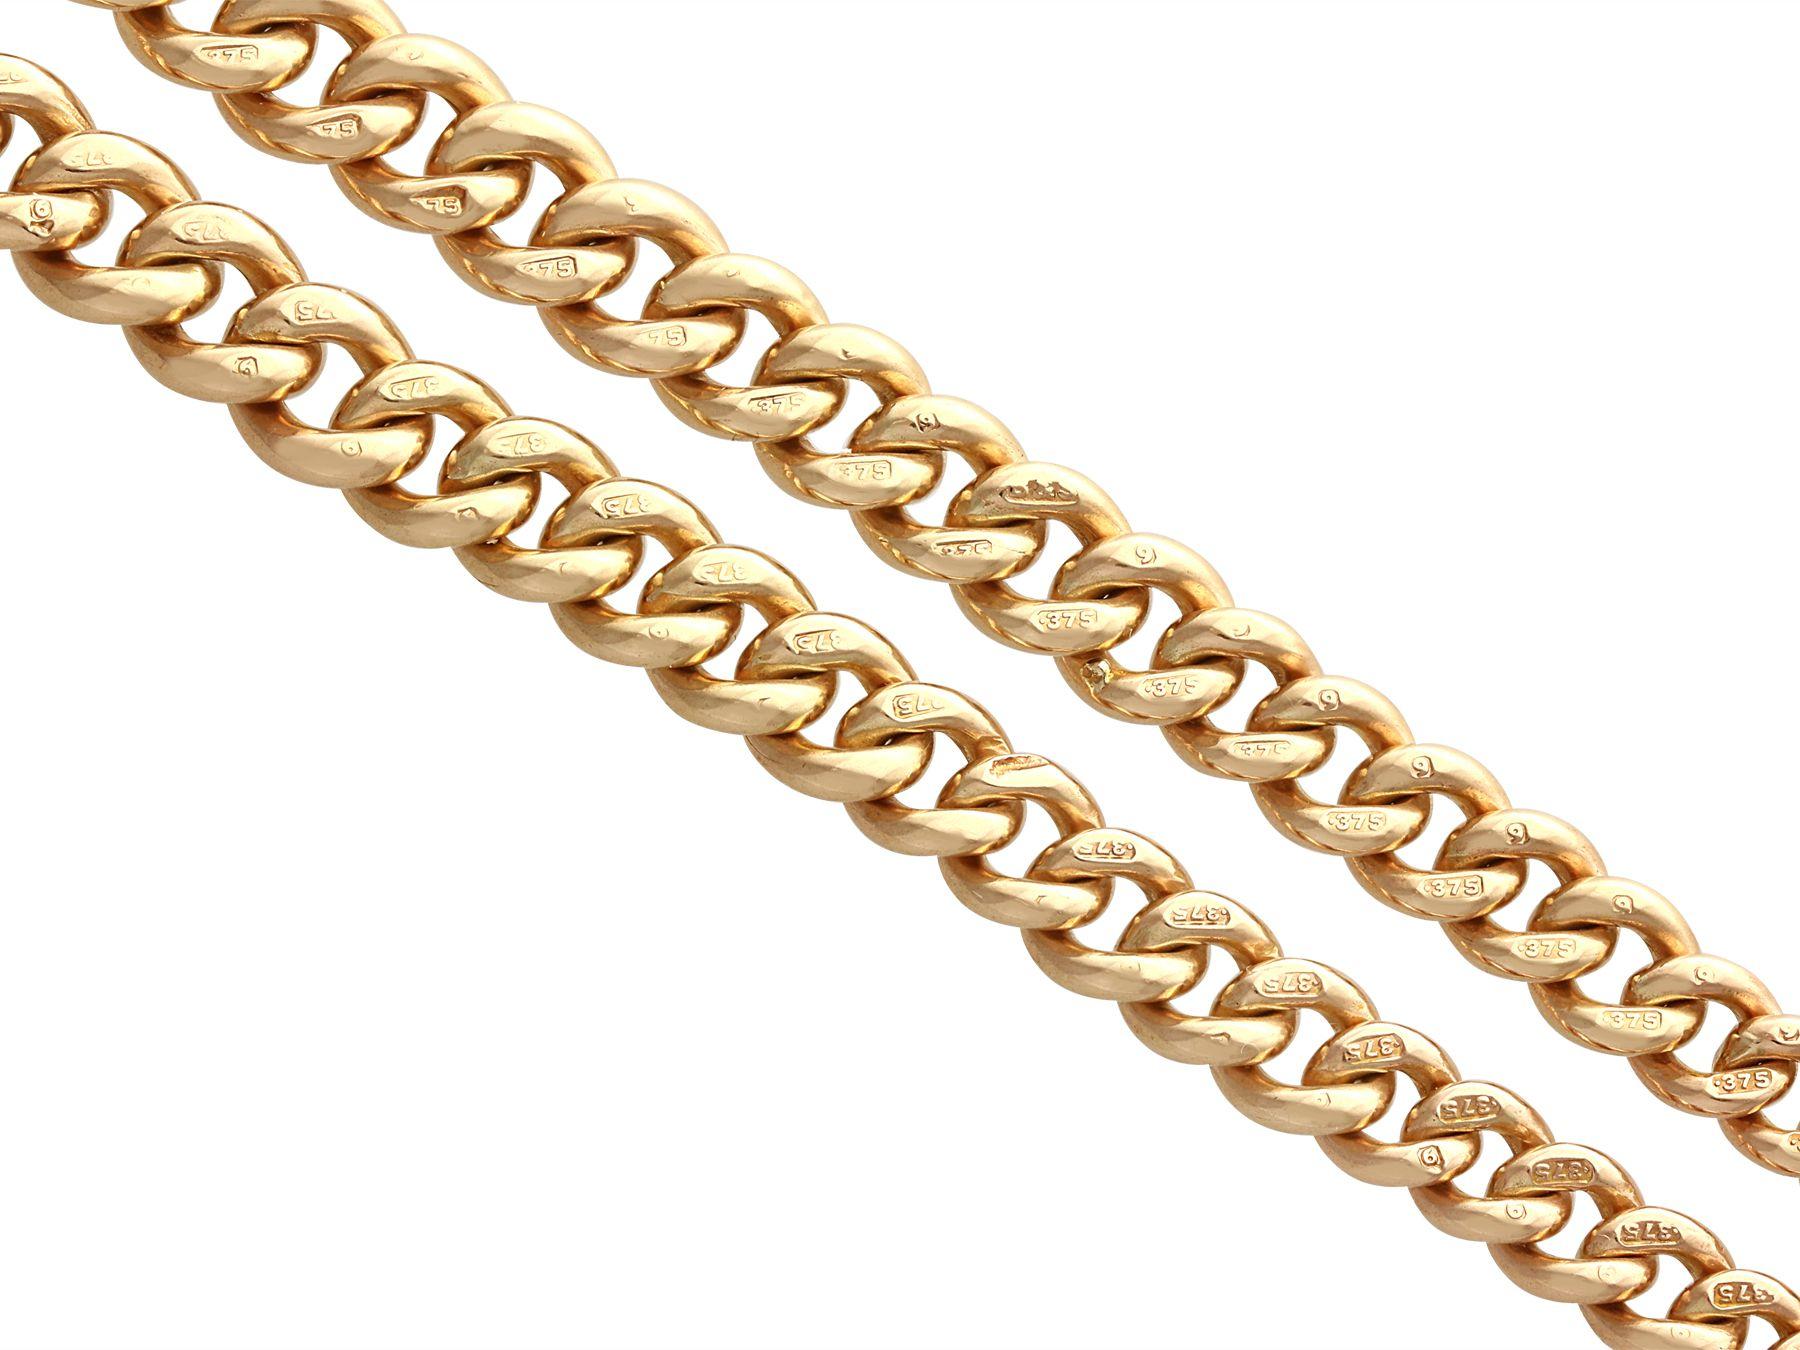 9k Yellow Gold Double Albert Watch Chain In Excellent Condition For Sale In Jesmond, Newcastle Upon Tyne